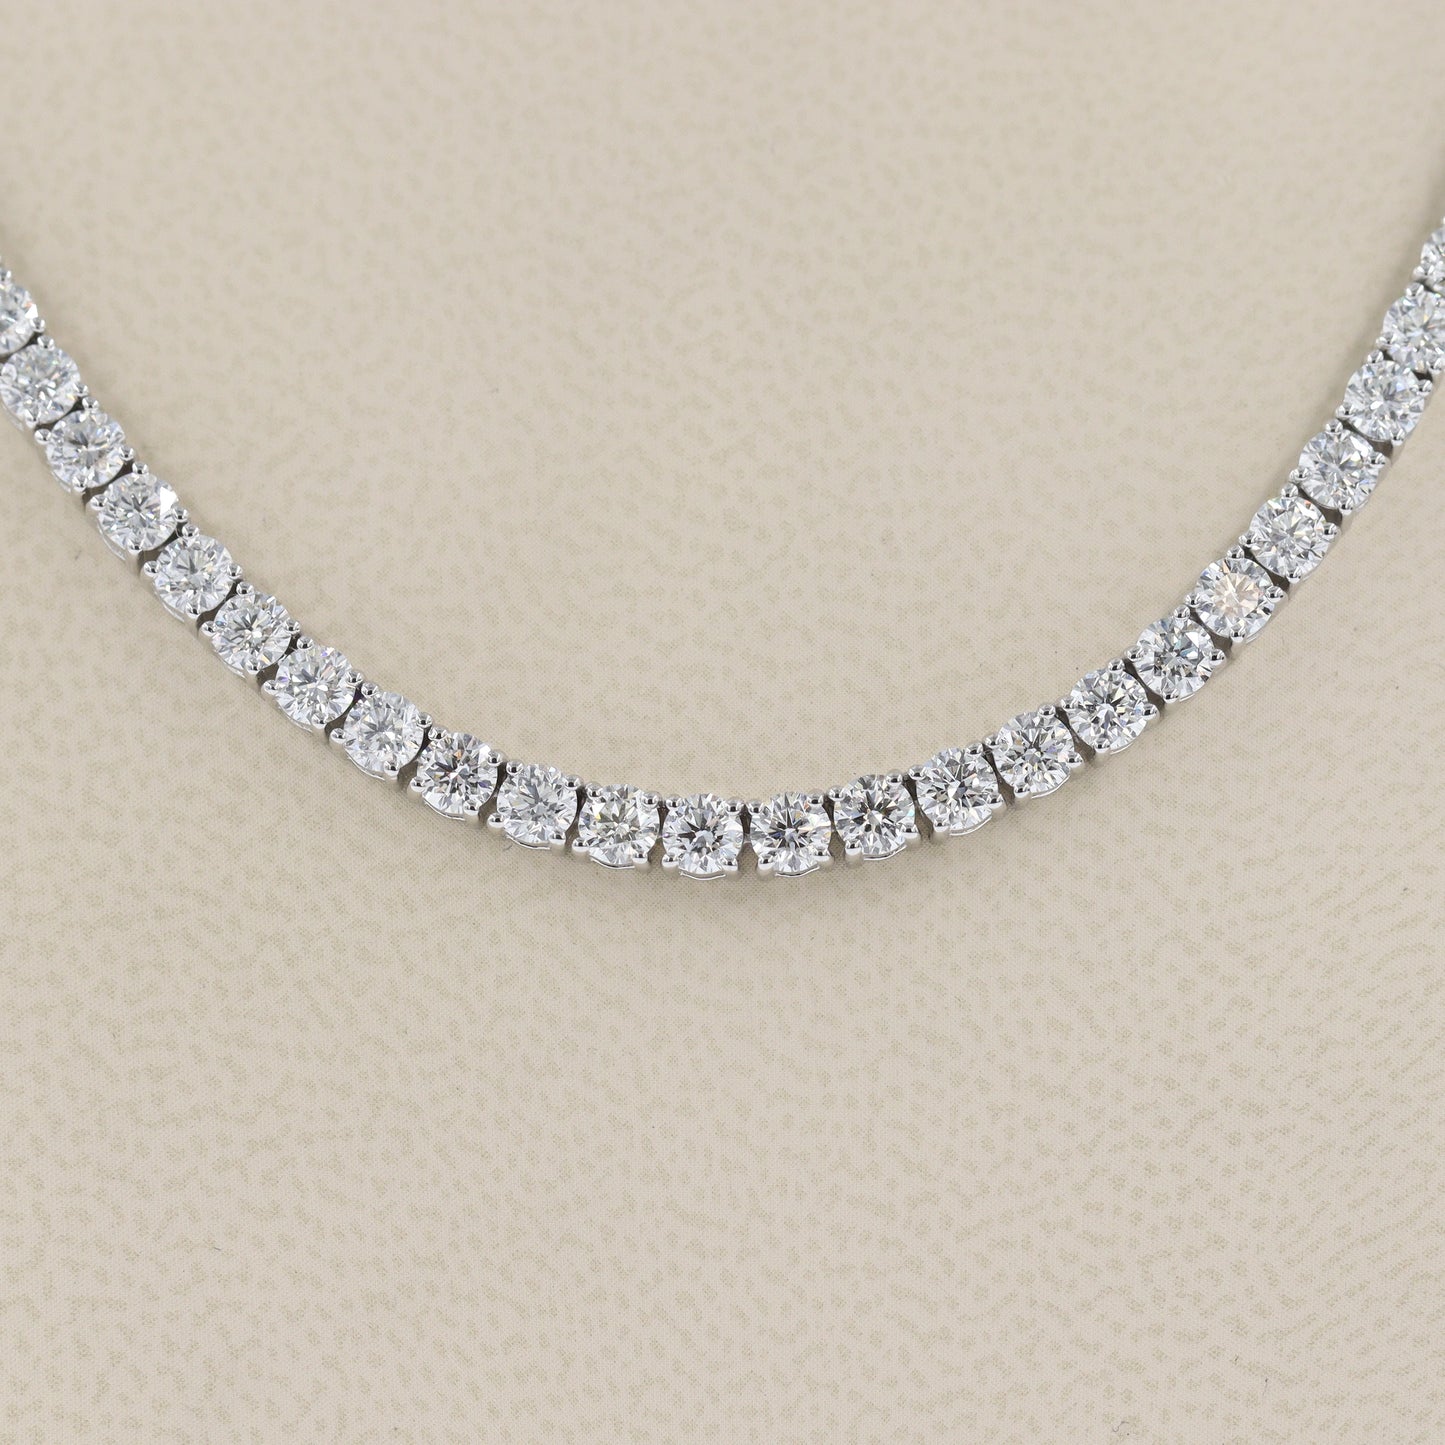 17ct Diamond Tennis Necklace/Natural Round Diamond Tennis Necklace/Diamond Engagement Necklace/Four prong Tennis Necklace/Anniversary Gift